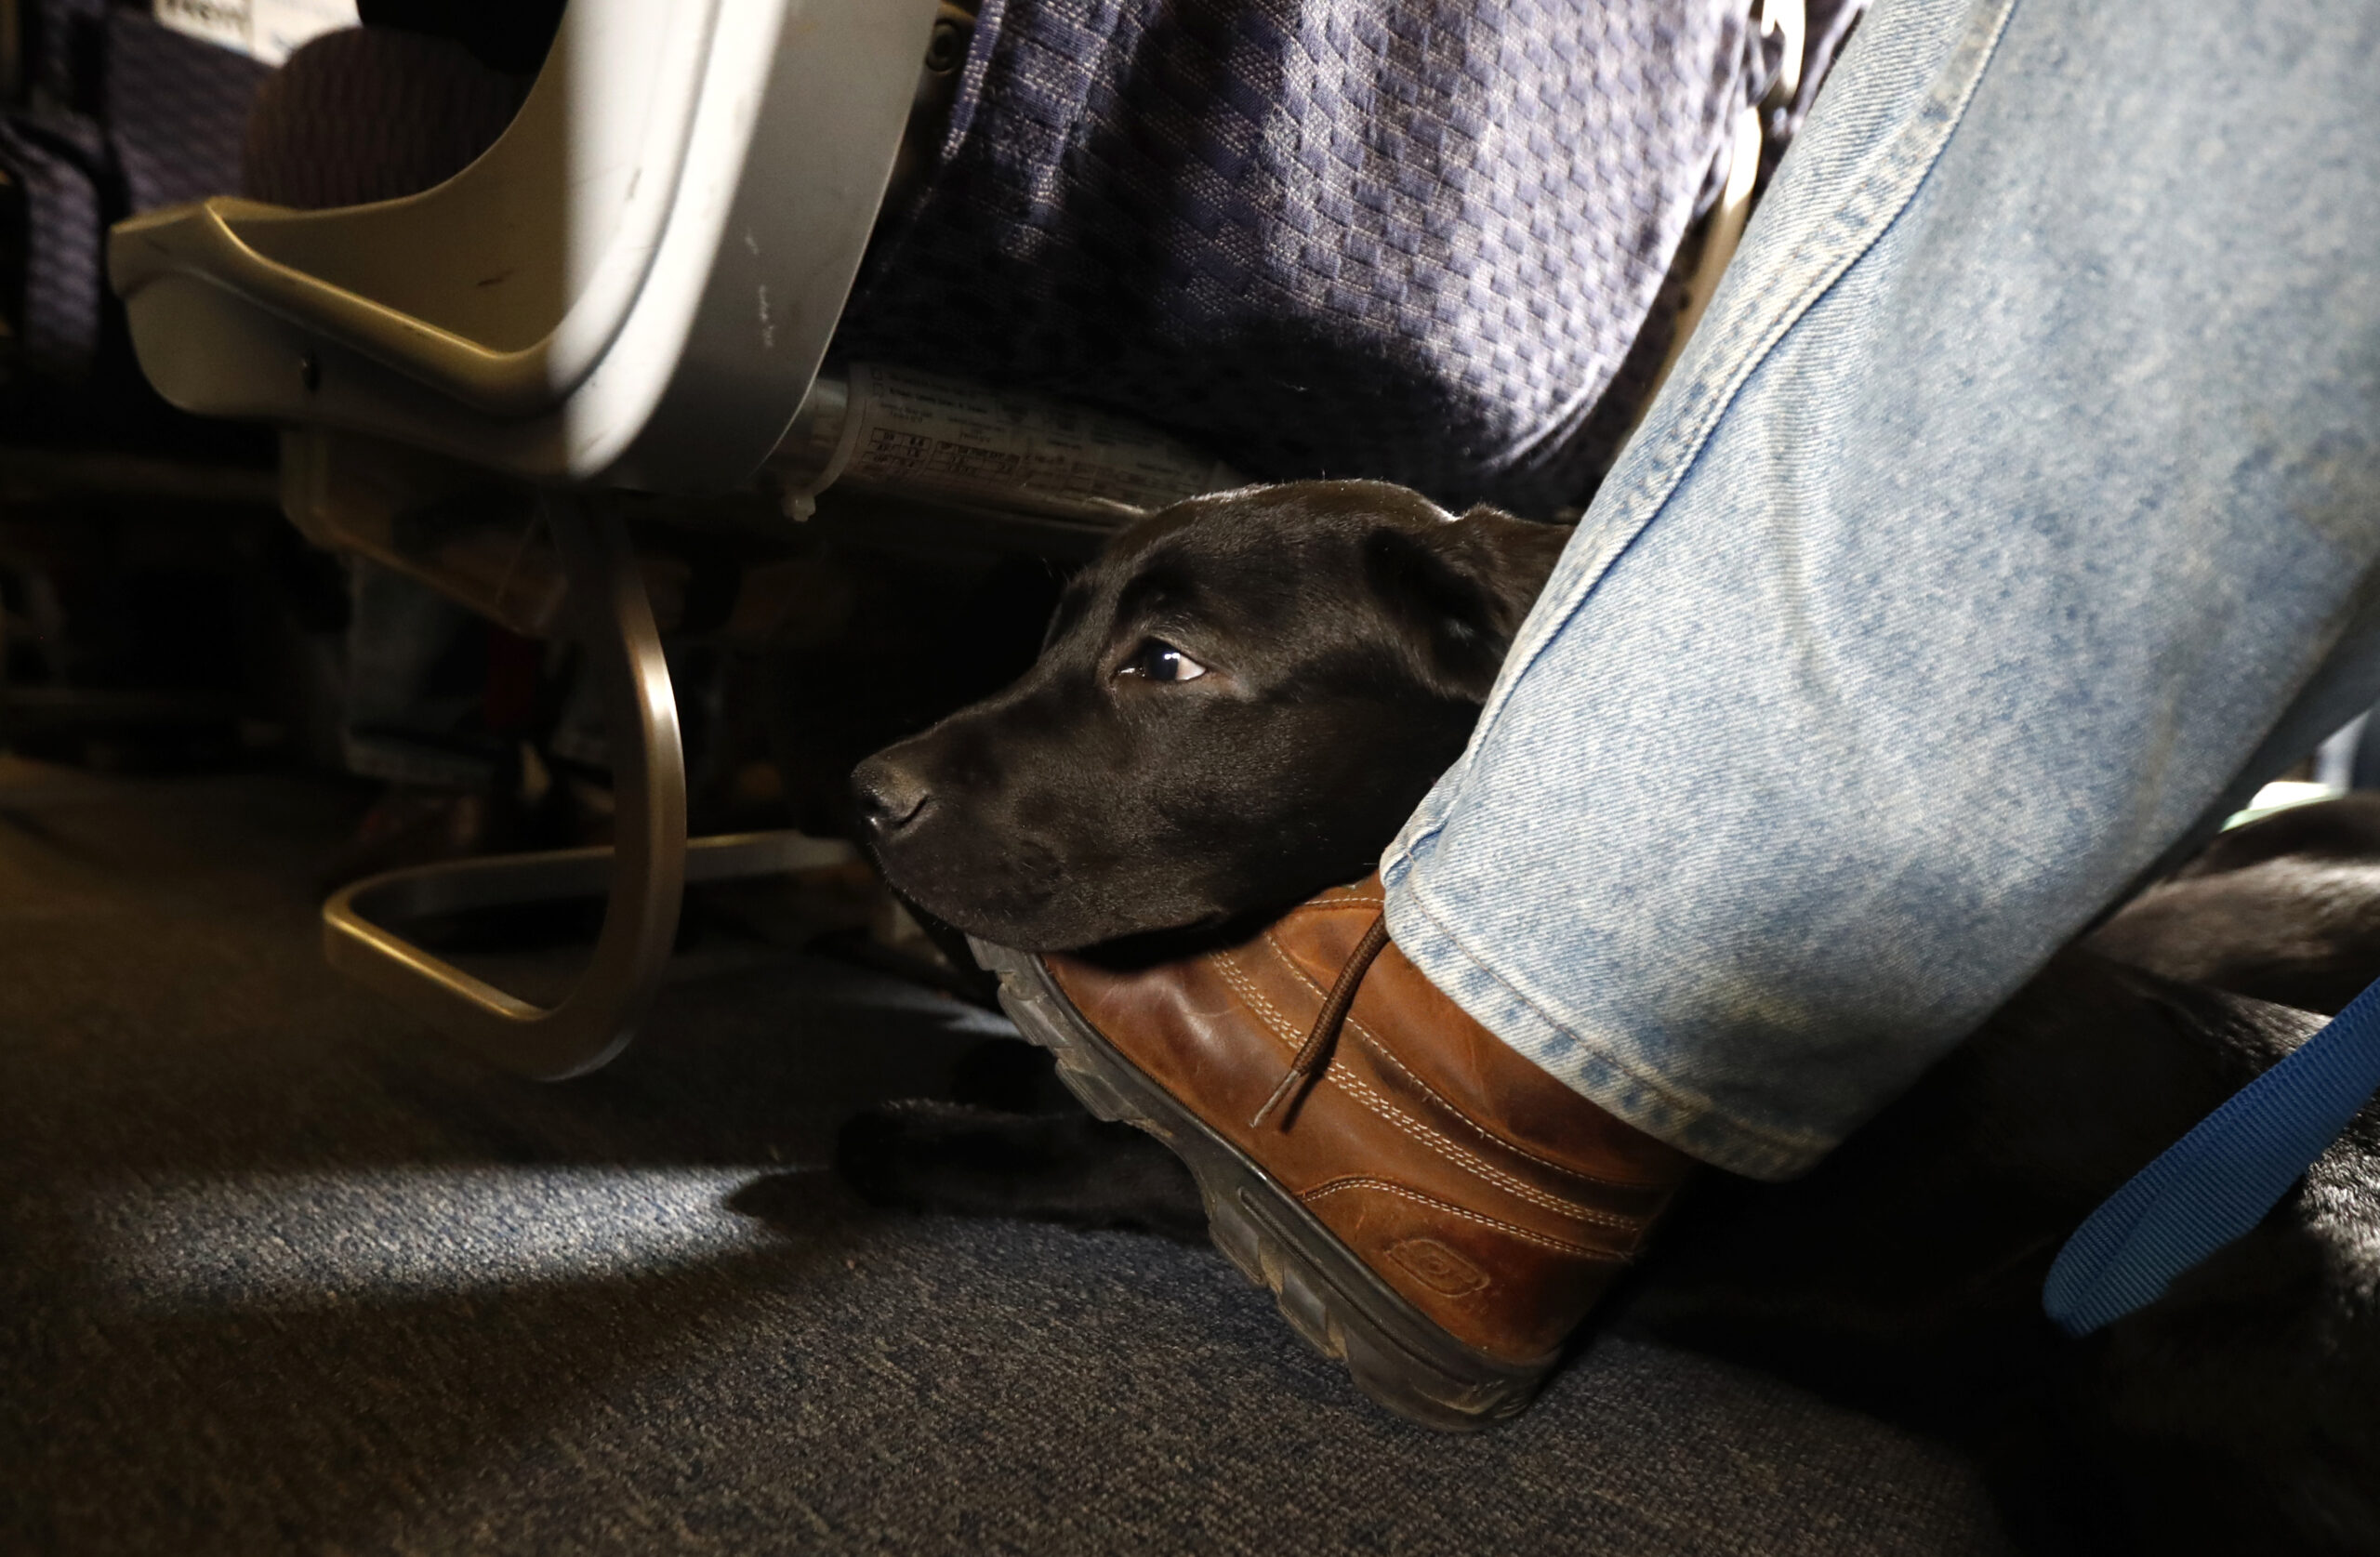 FILE - In this April 1, 2017, file photo, a service dog named Orlando rests on the foot of its trainer, John Reddan, while sitting inside a United Airlines plane at Newark Liberty International Airport during a training exercise in Newark, N.J. The Transportation Department issued a final rule Wednesday, Dec. 2, 2020, covering service animals. The rule says only dogs can qualify, and they have to be specially trained to help a person with disabilities. For years, some travelers have been bringing untrained dogs and all kinds of other animals on board by claiming they need the animal for emotional support.(AP Photo/Julio Cortez, File)